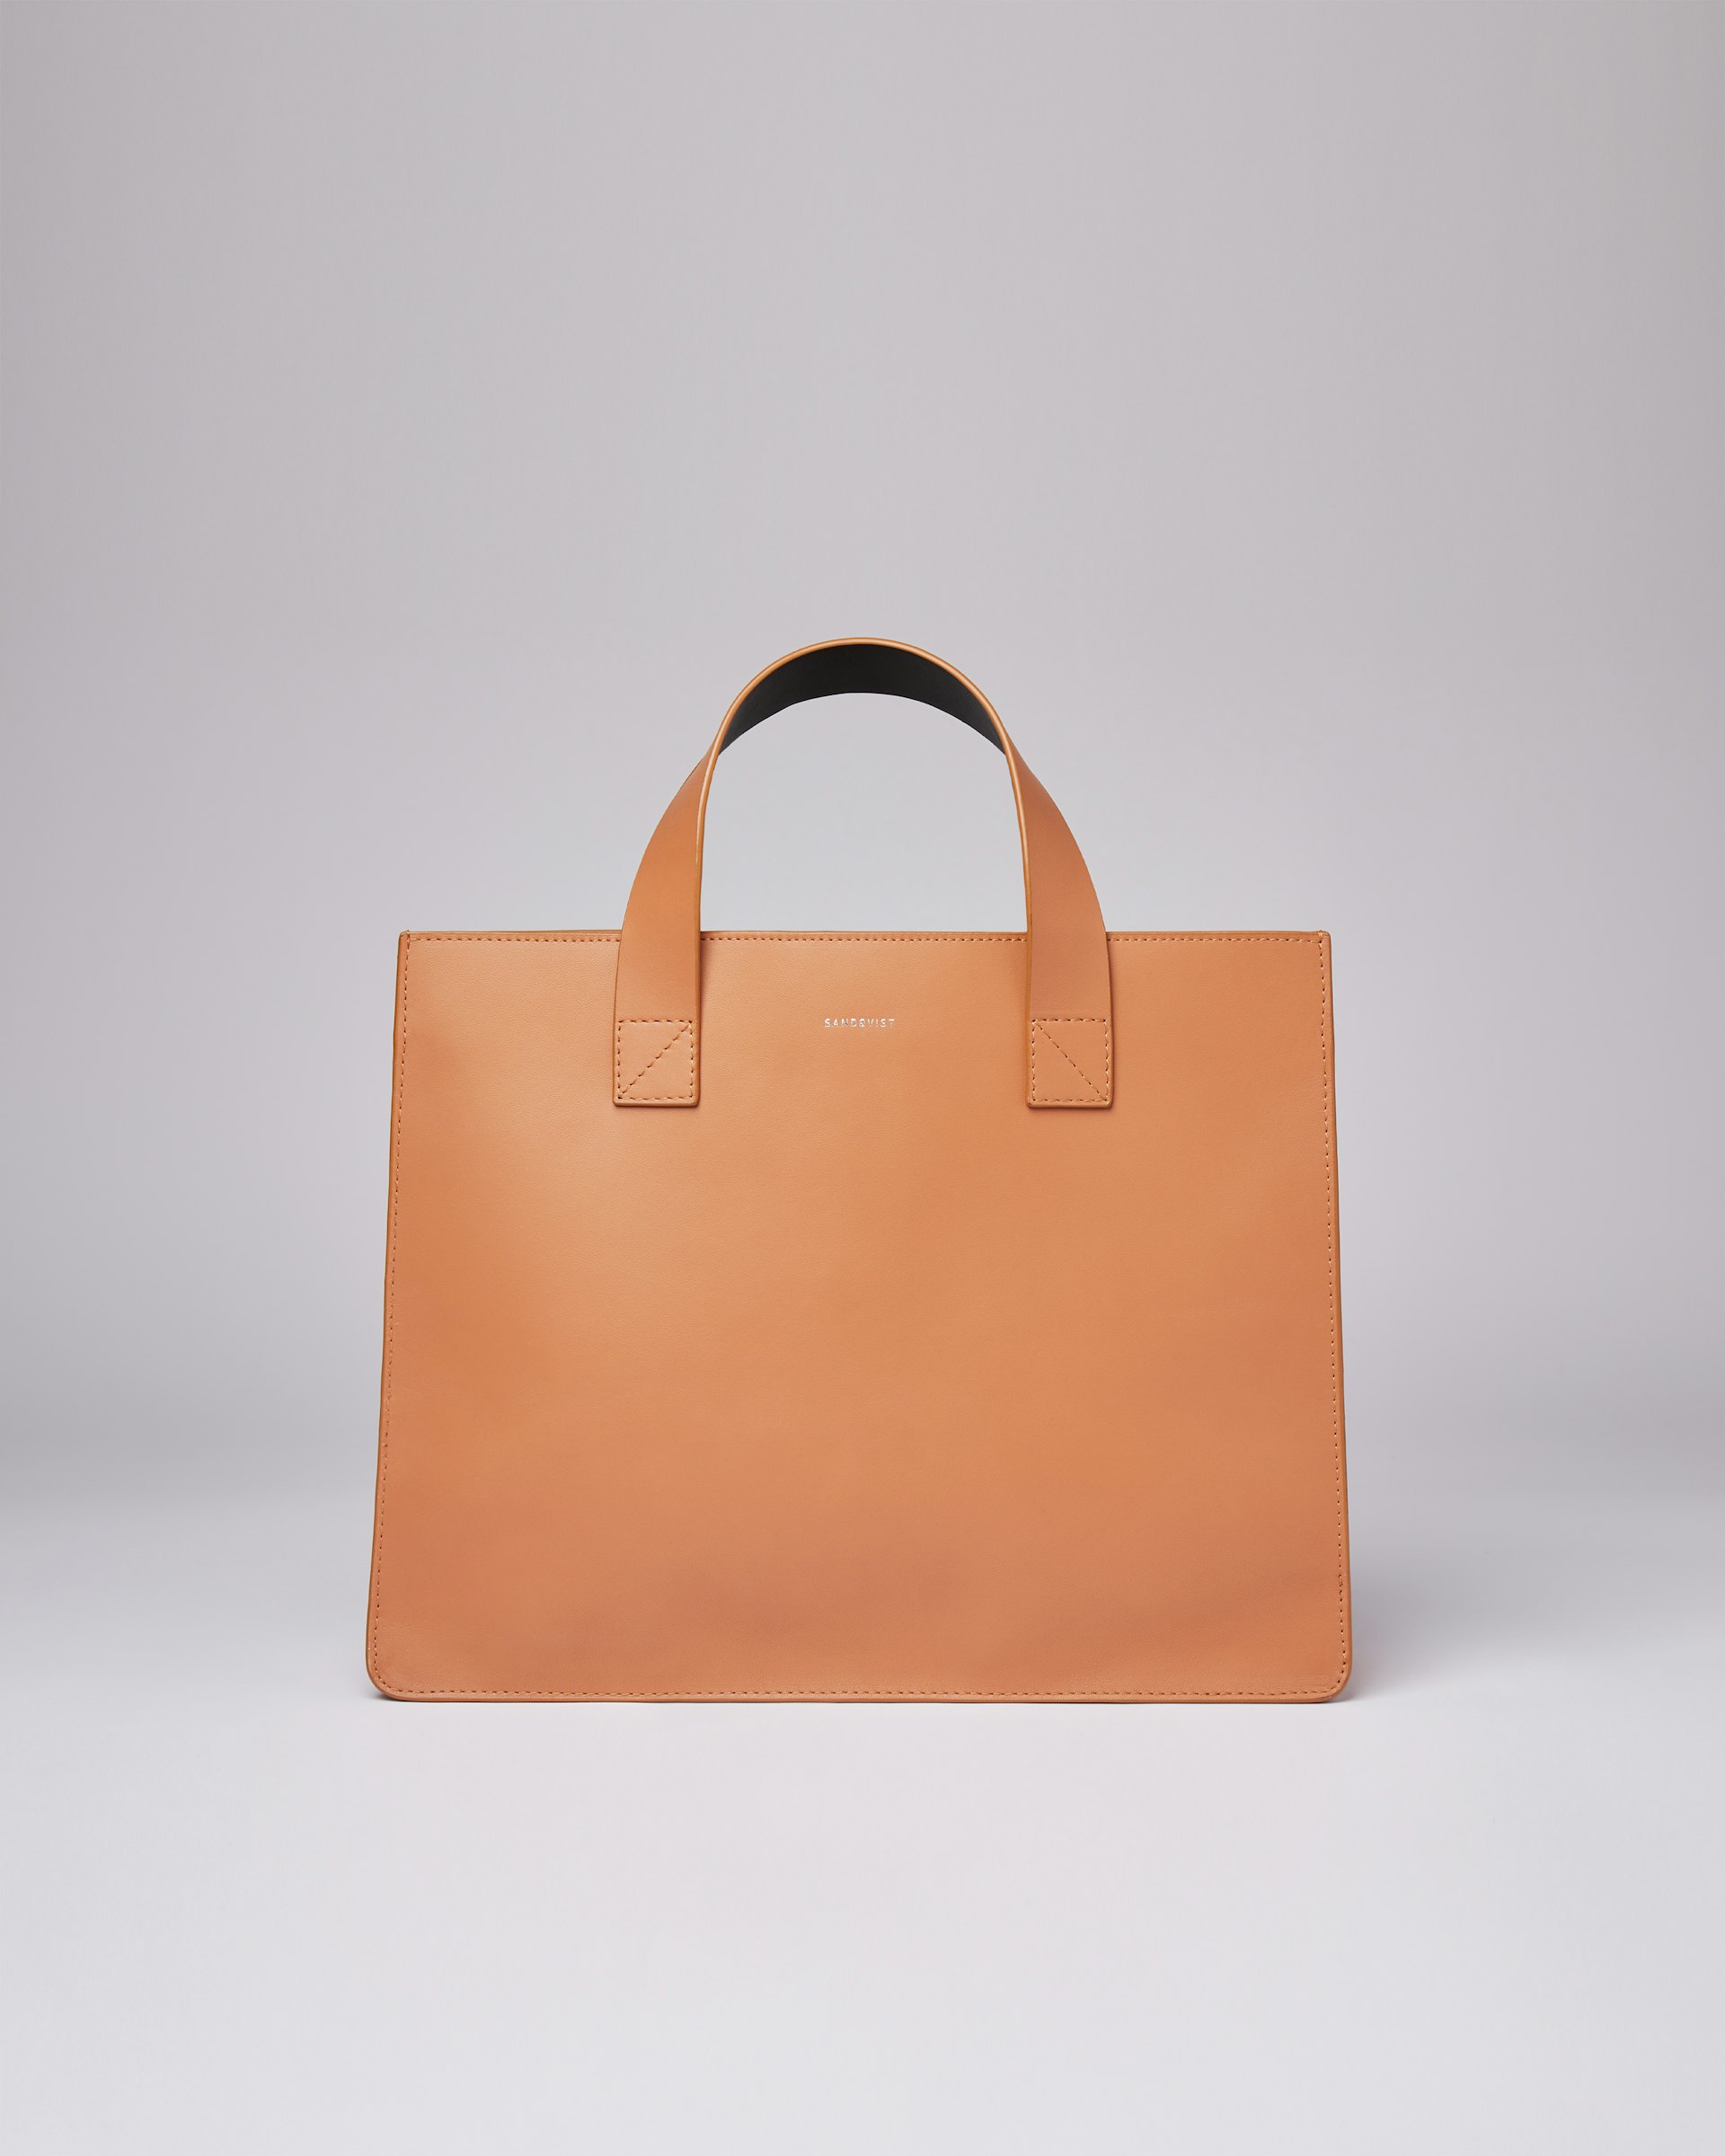 Edie belongs to the category Tote bags and is in color toffee (1 of 7)